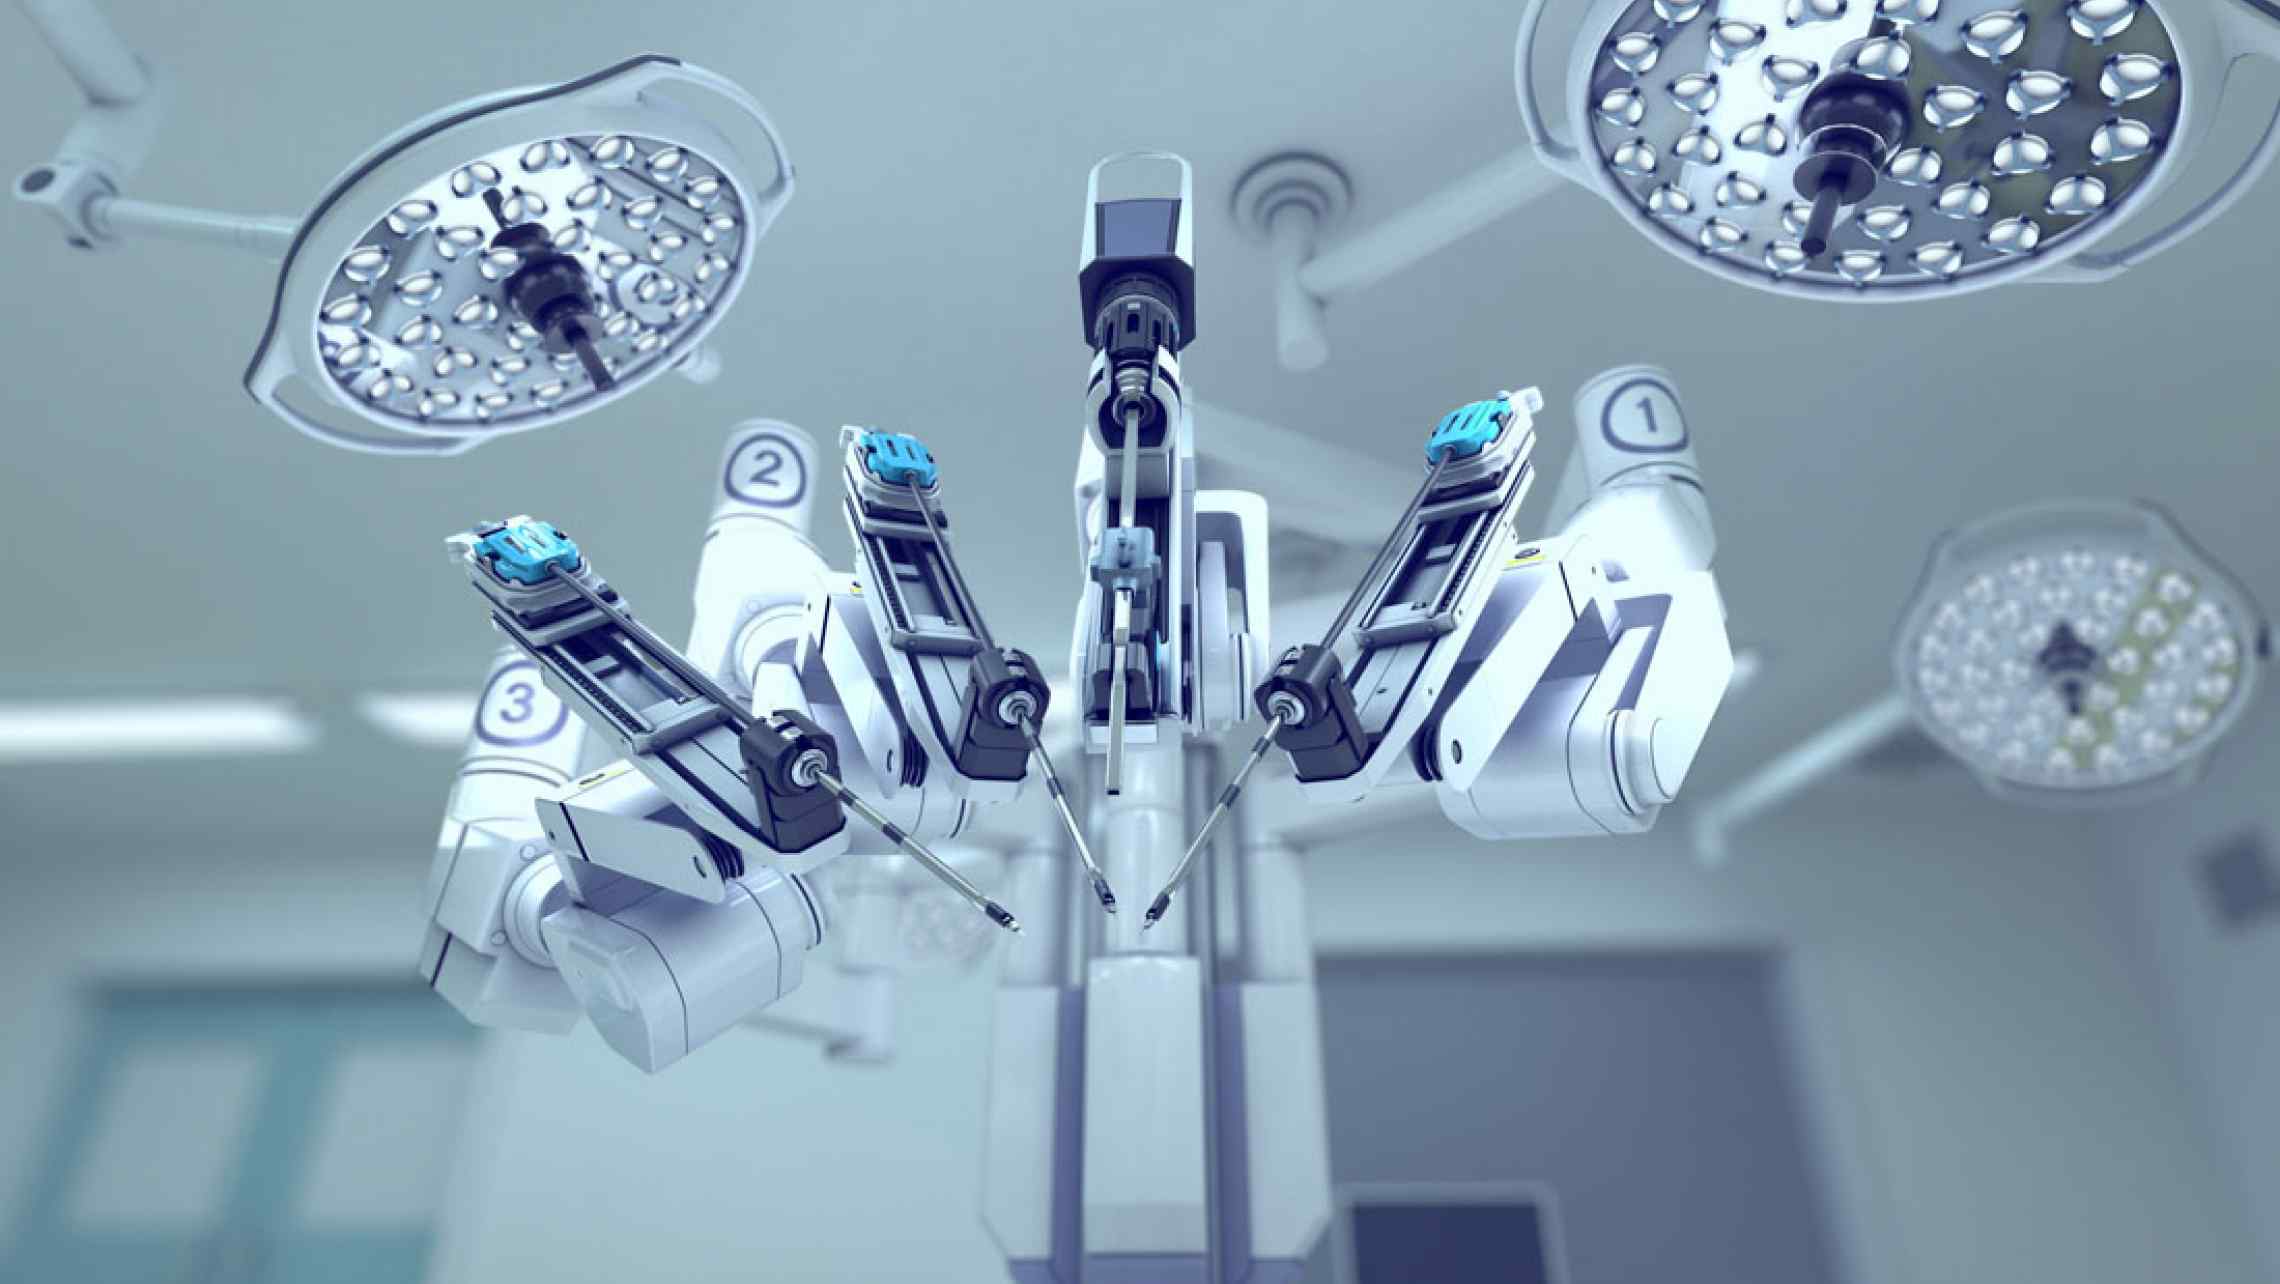 FOR THE FIRST TIME, A ROBOT PASSED A MEDICAL LICENSING EXAM